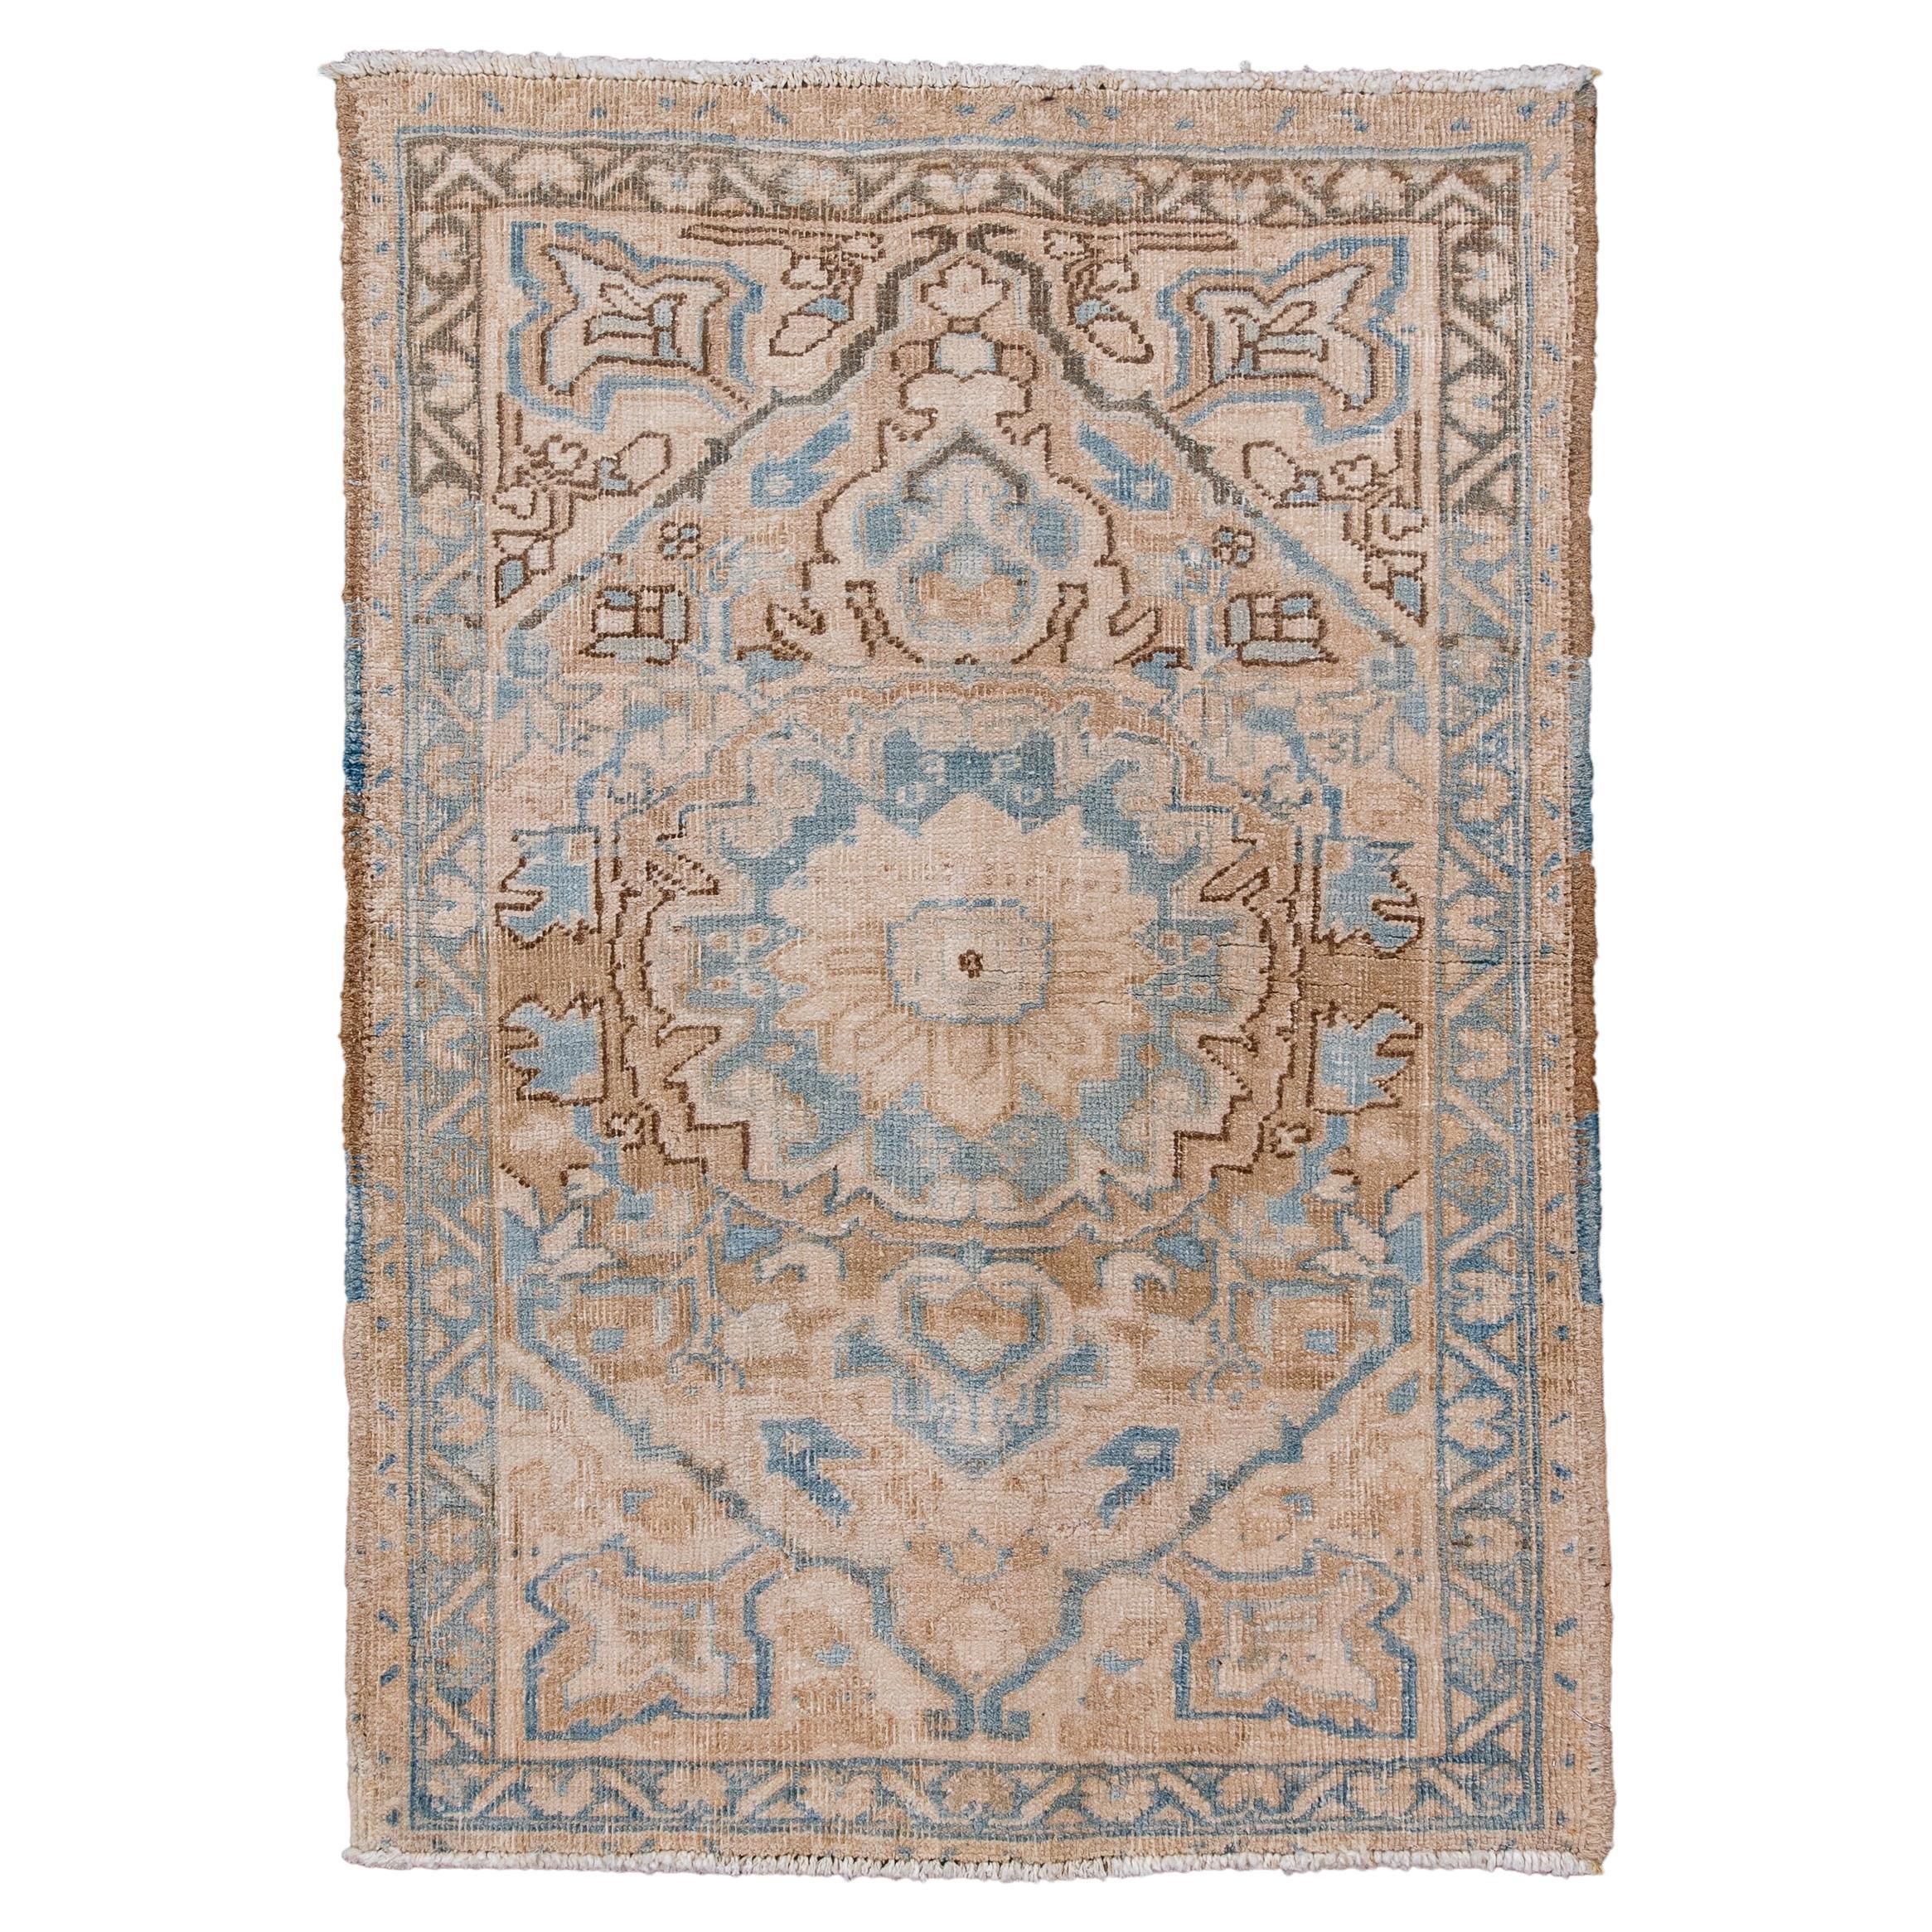 Small Size Antique Heriz Rug with a Muted Color Palette